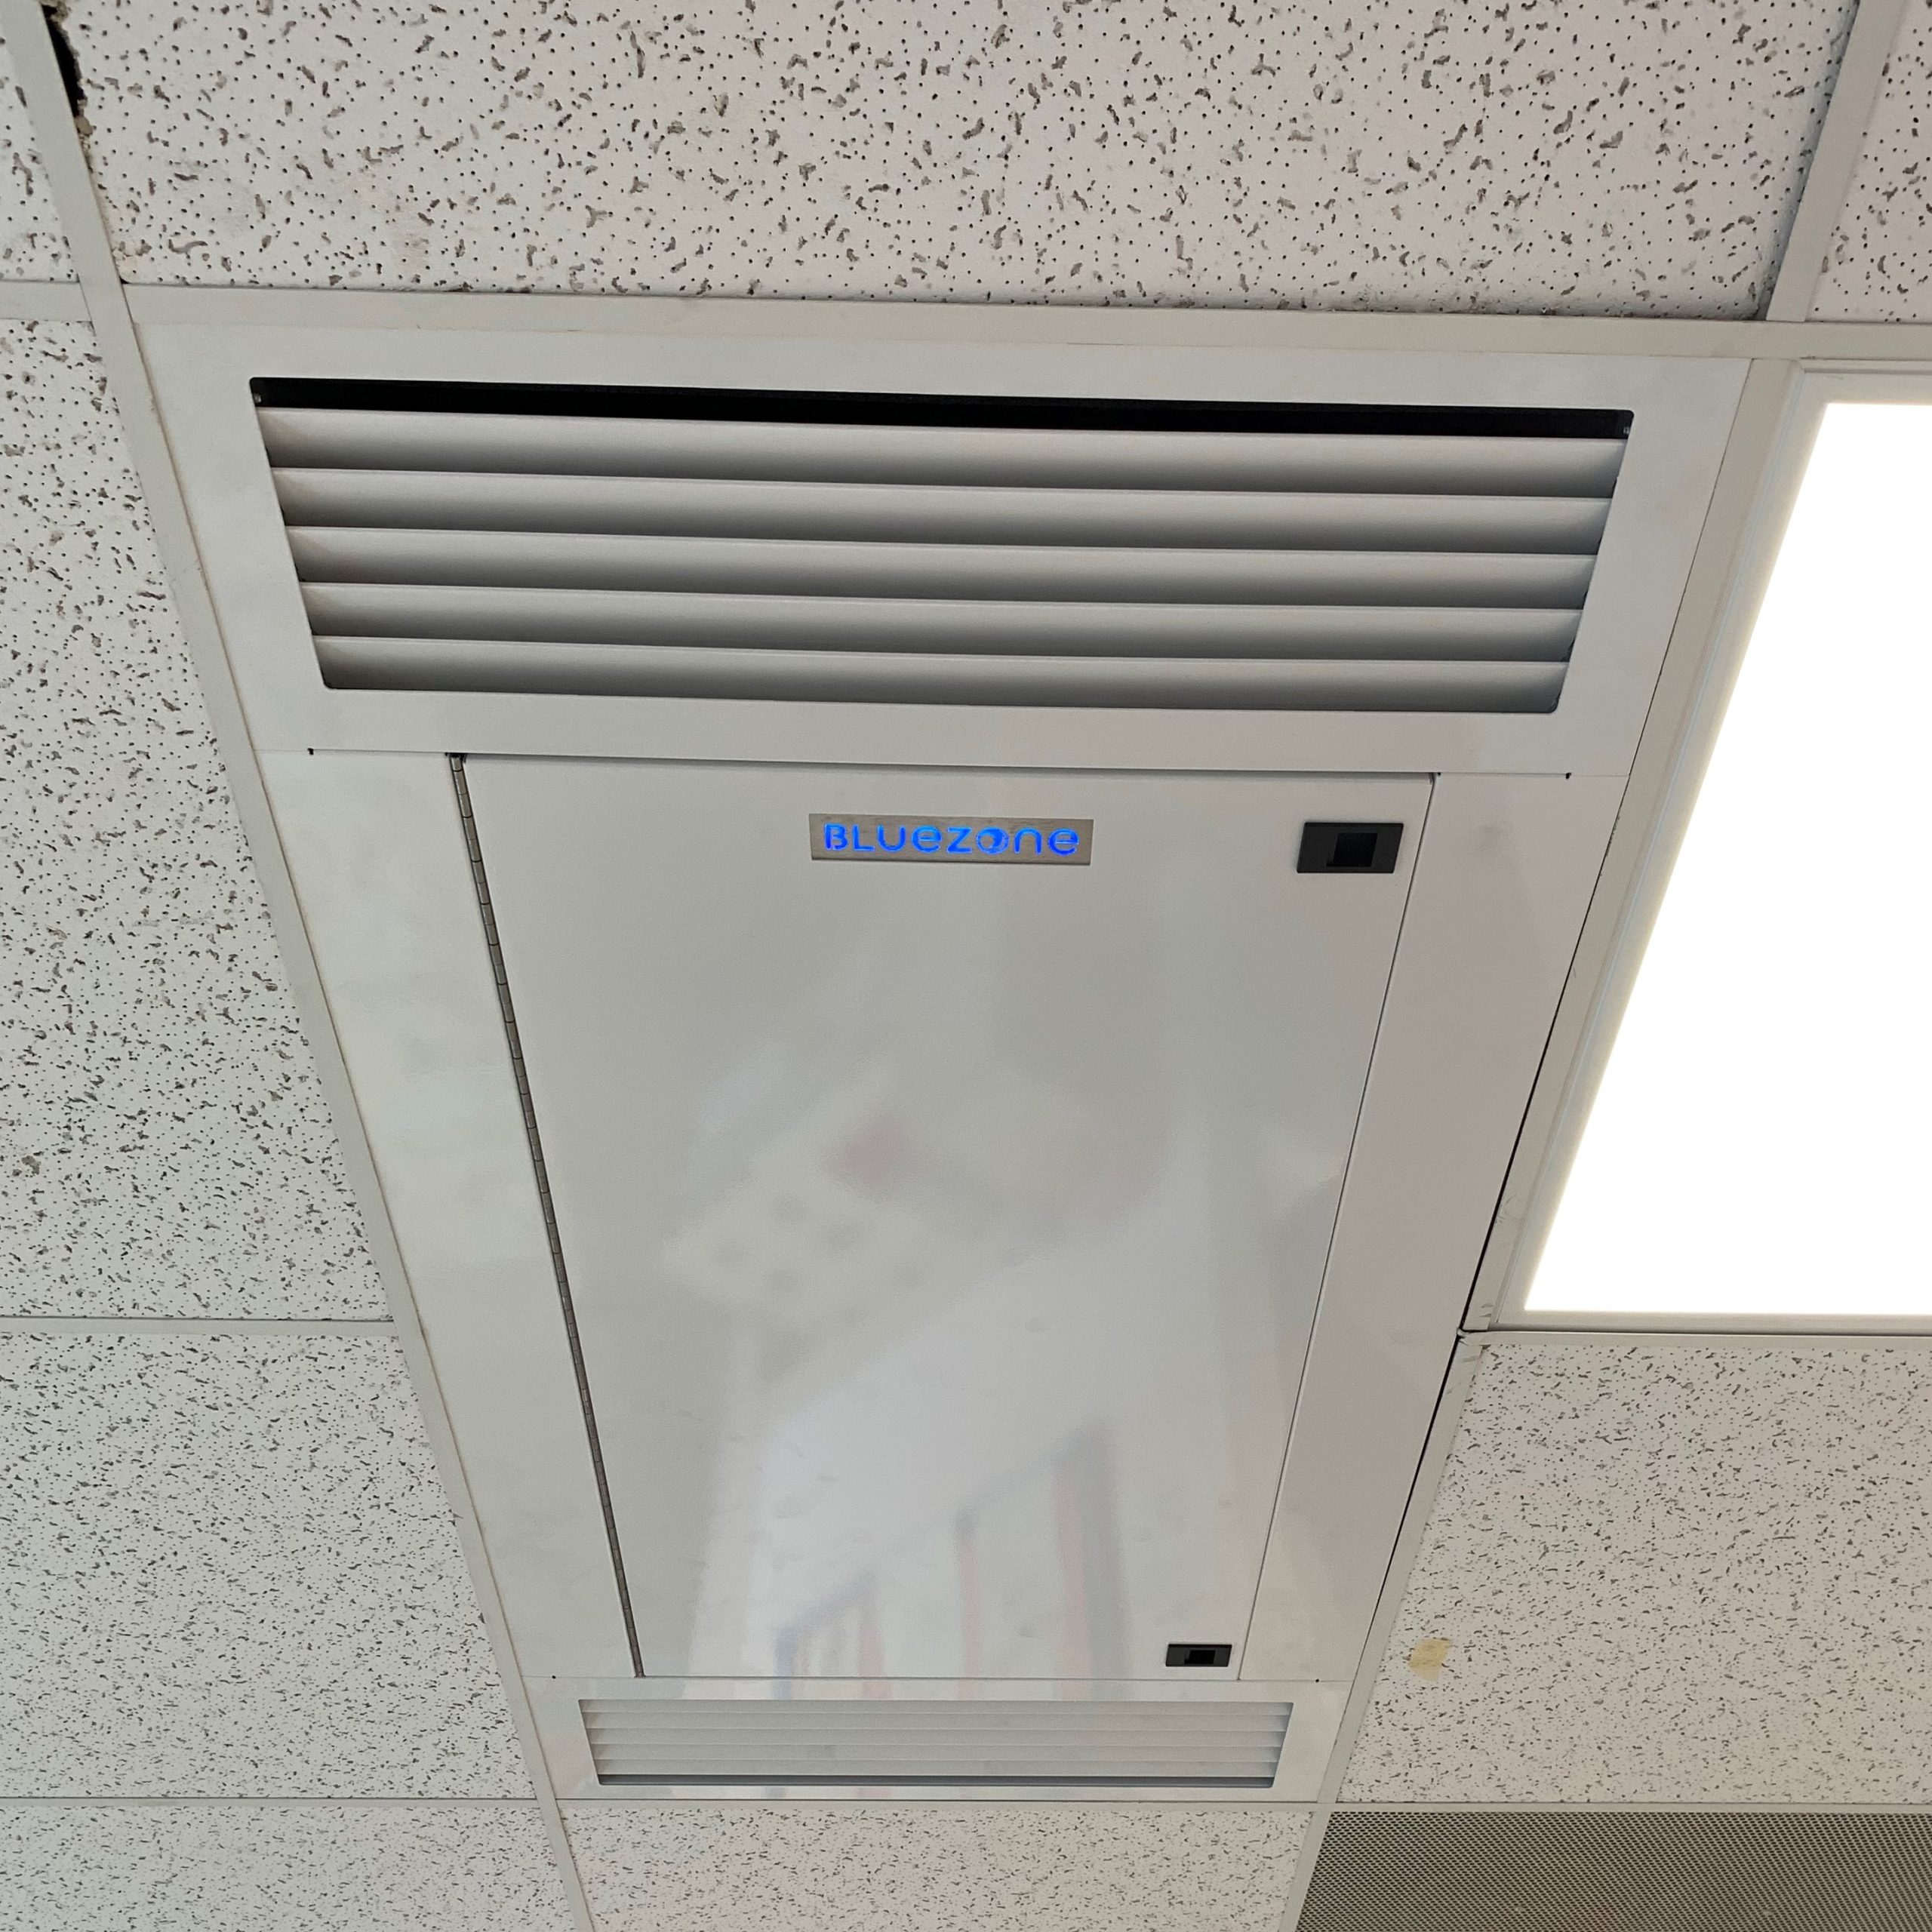 Bluezone air cleaner installed at DVCC